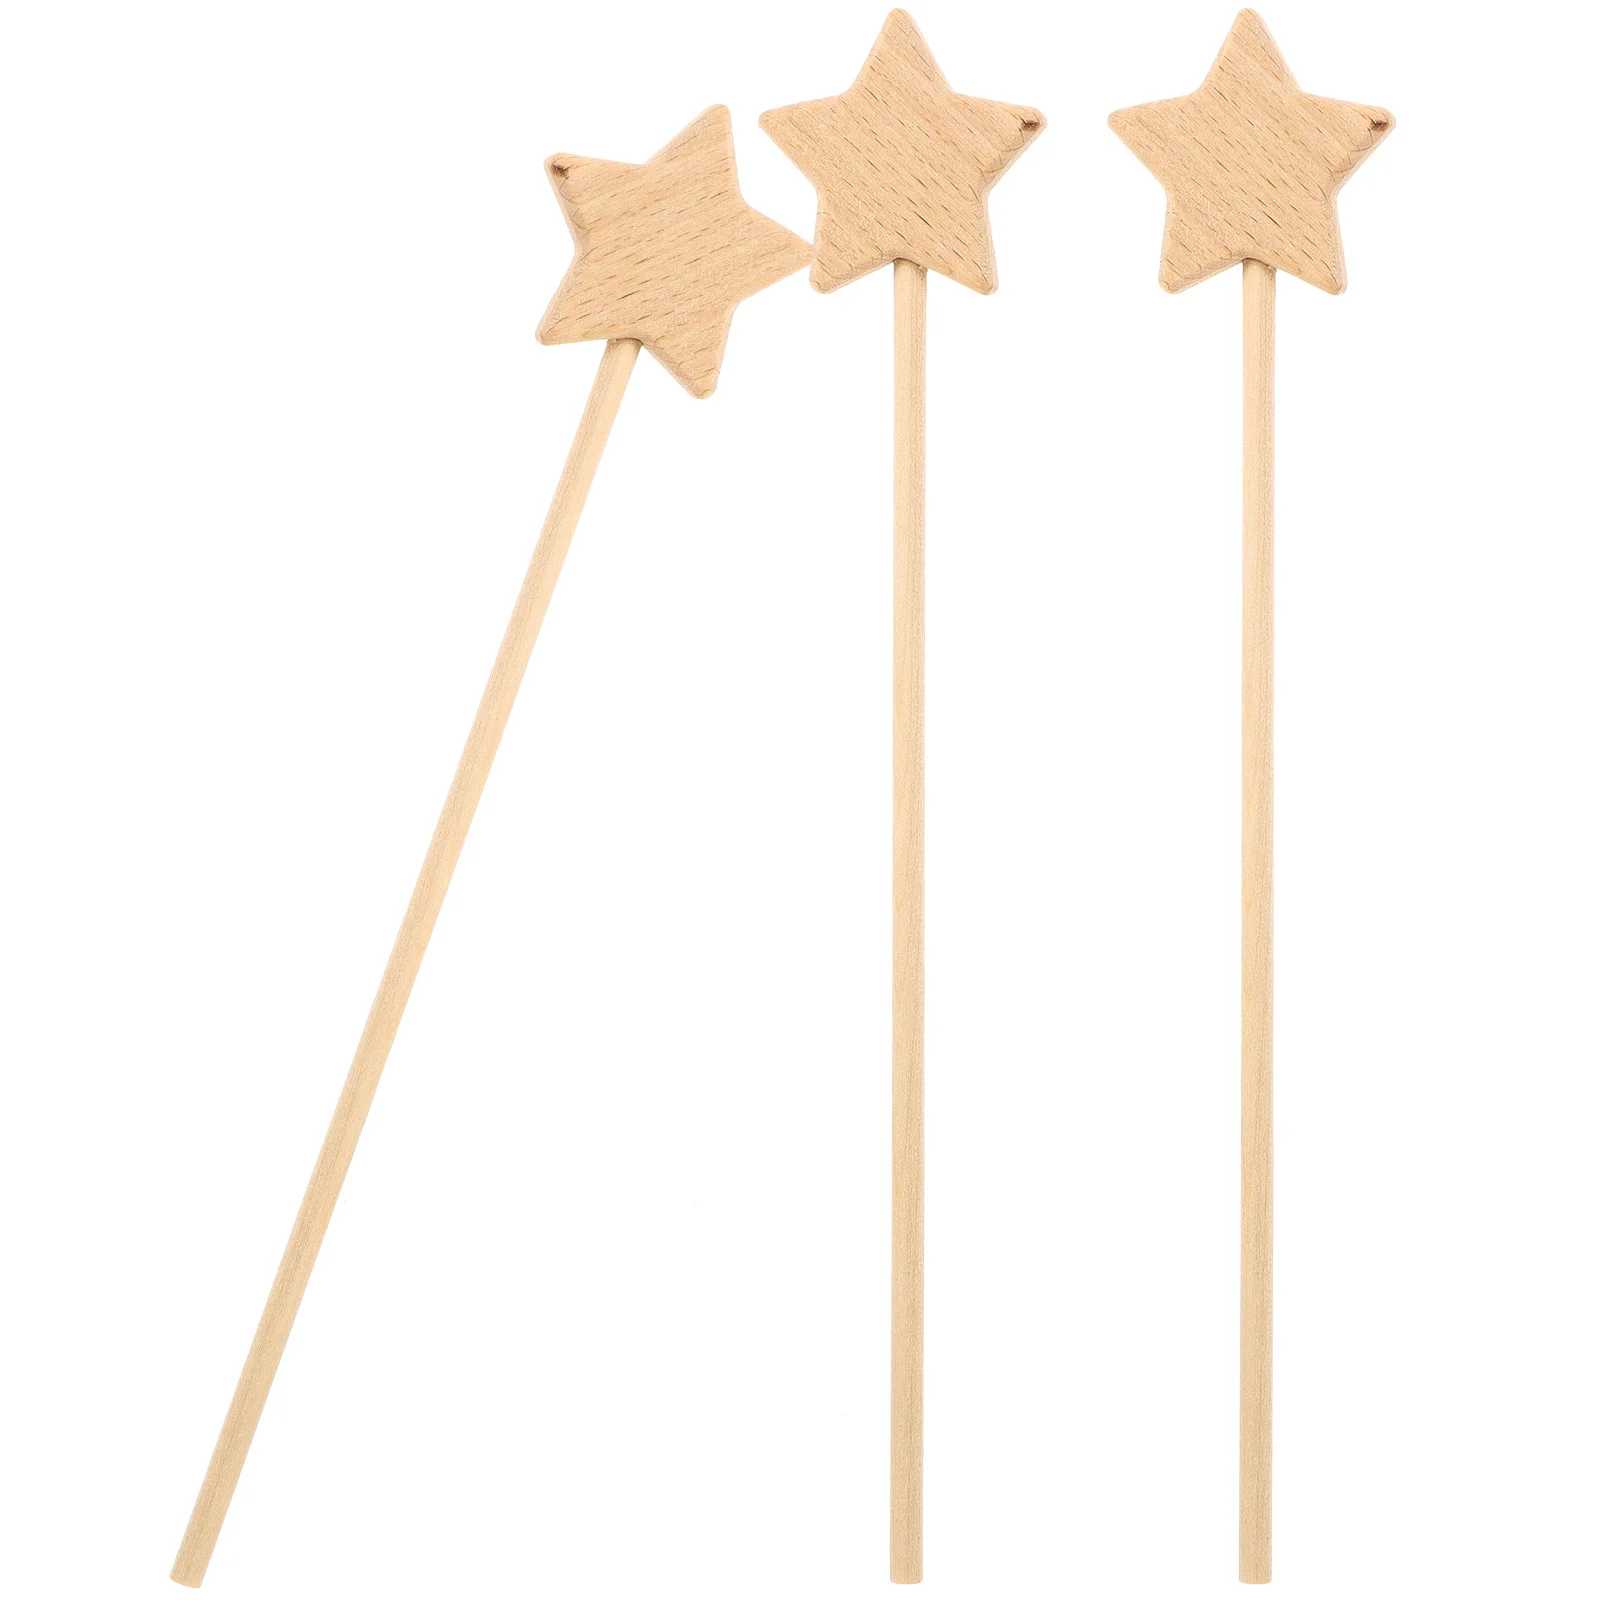 

Fairy Wand Kids Performance Props Blank Unfinished Wooden Party Decorations Stick Unpainted Favors Sticks